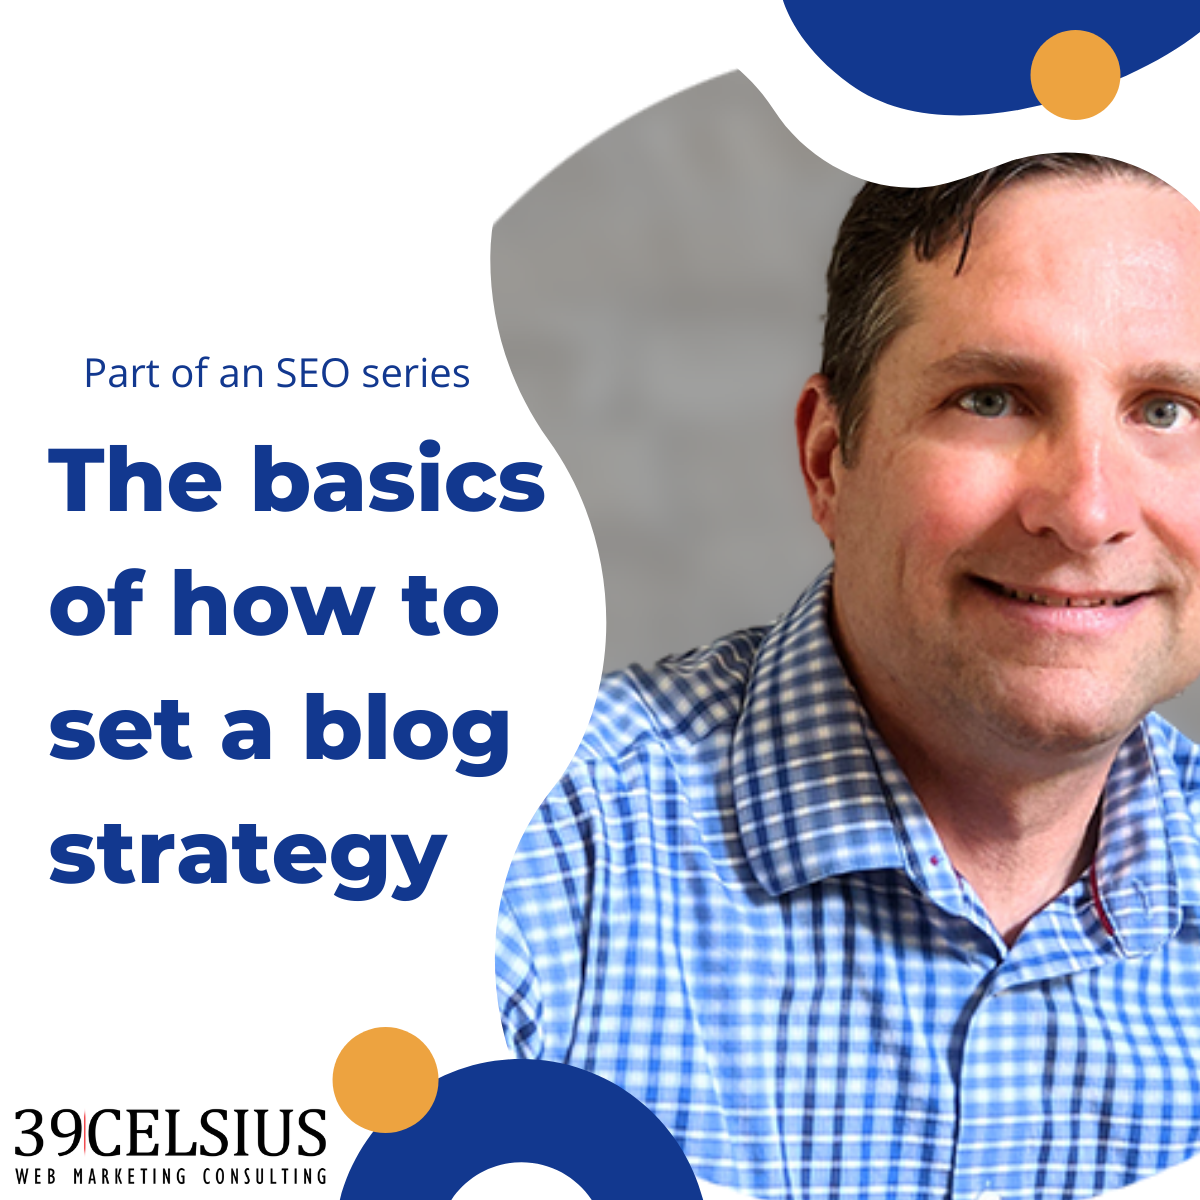 How to develop a blog strategy